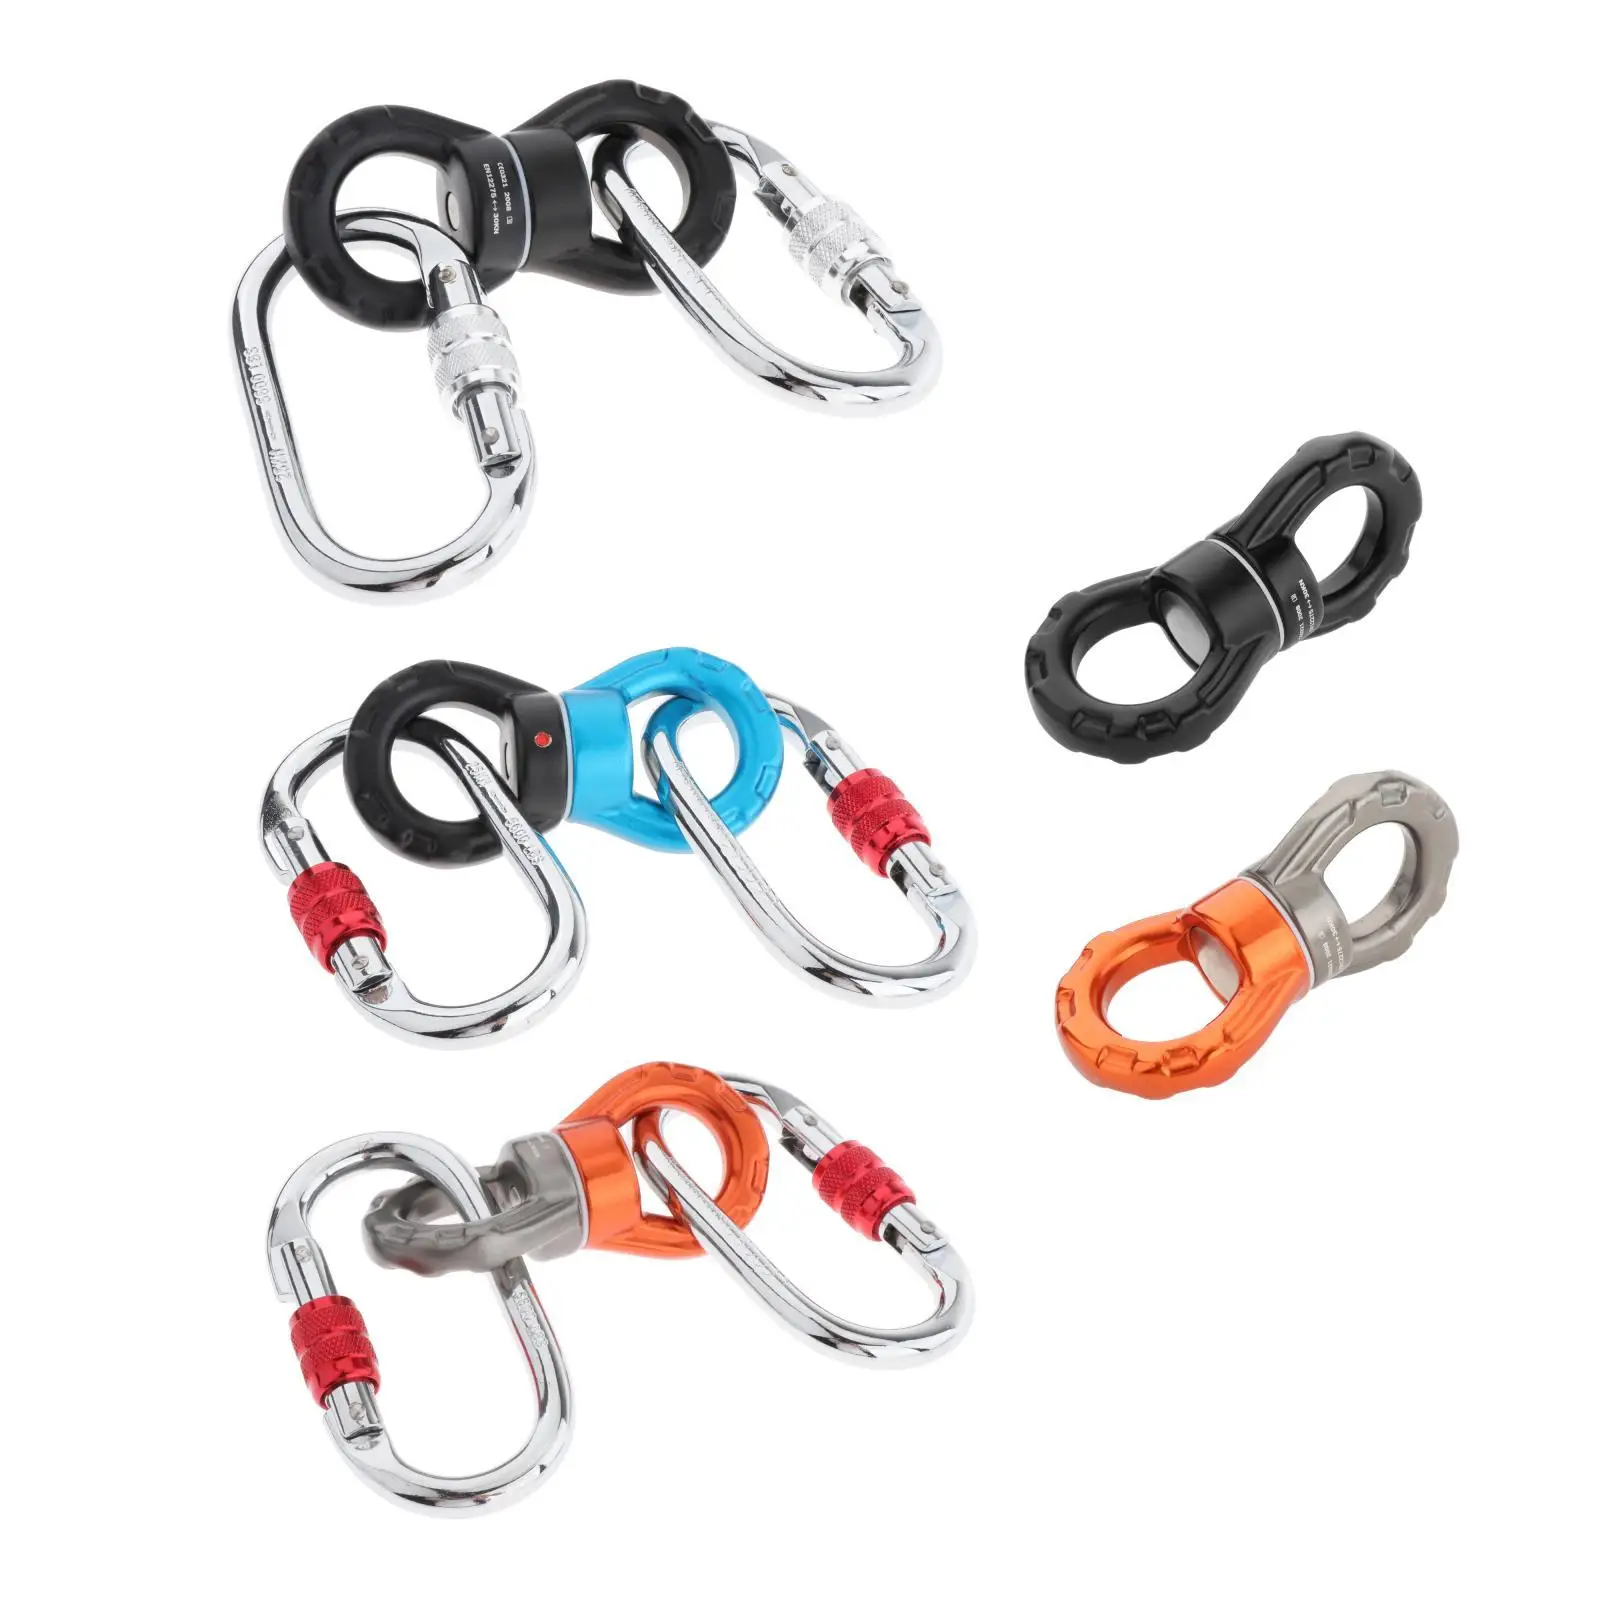 Swing Swivel 30kN Rotational Safety for Rock Climbing Indoor Aerial Rig